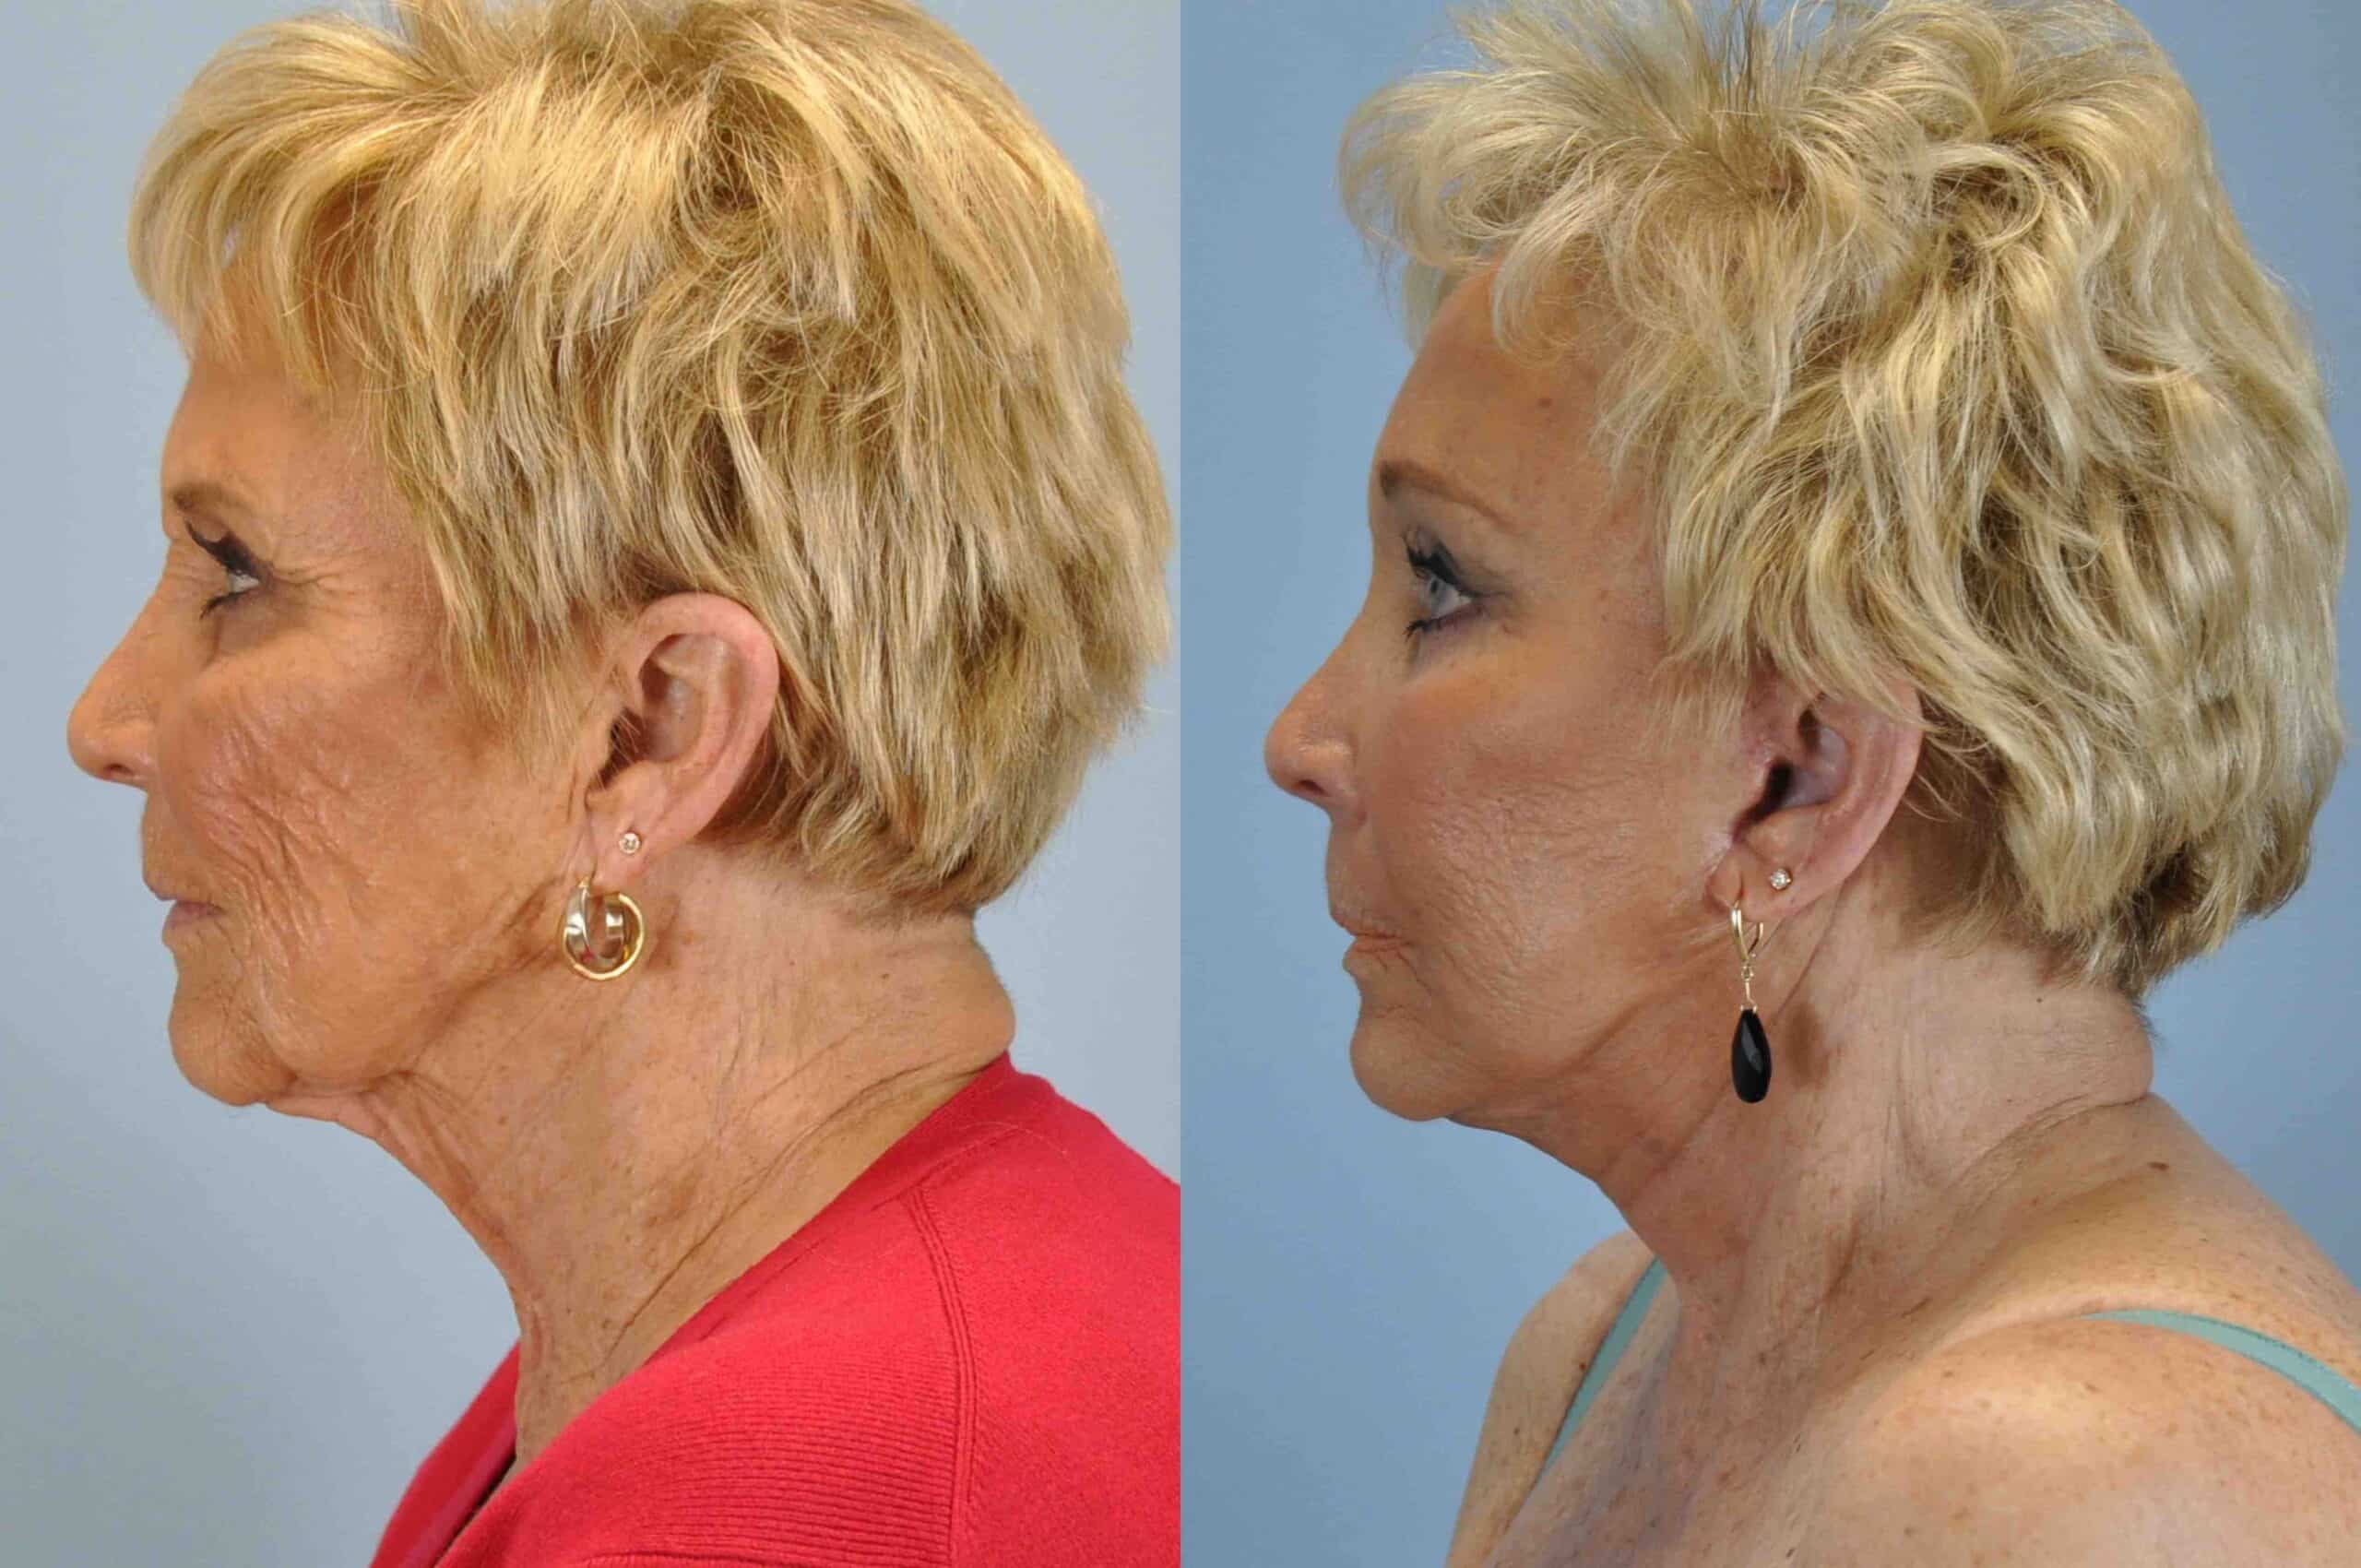 Before and after, 1 mo post op from Upper and Lower Blepharoplasty, Facelift, Neck Lift, Endo Brow Lift performed by Dr. Paul Vanek (side view)